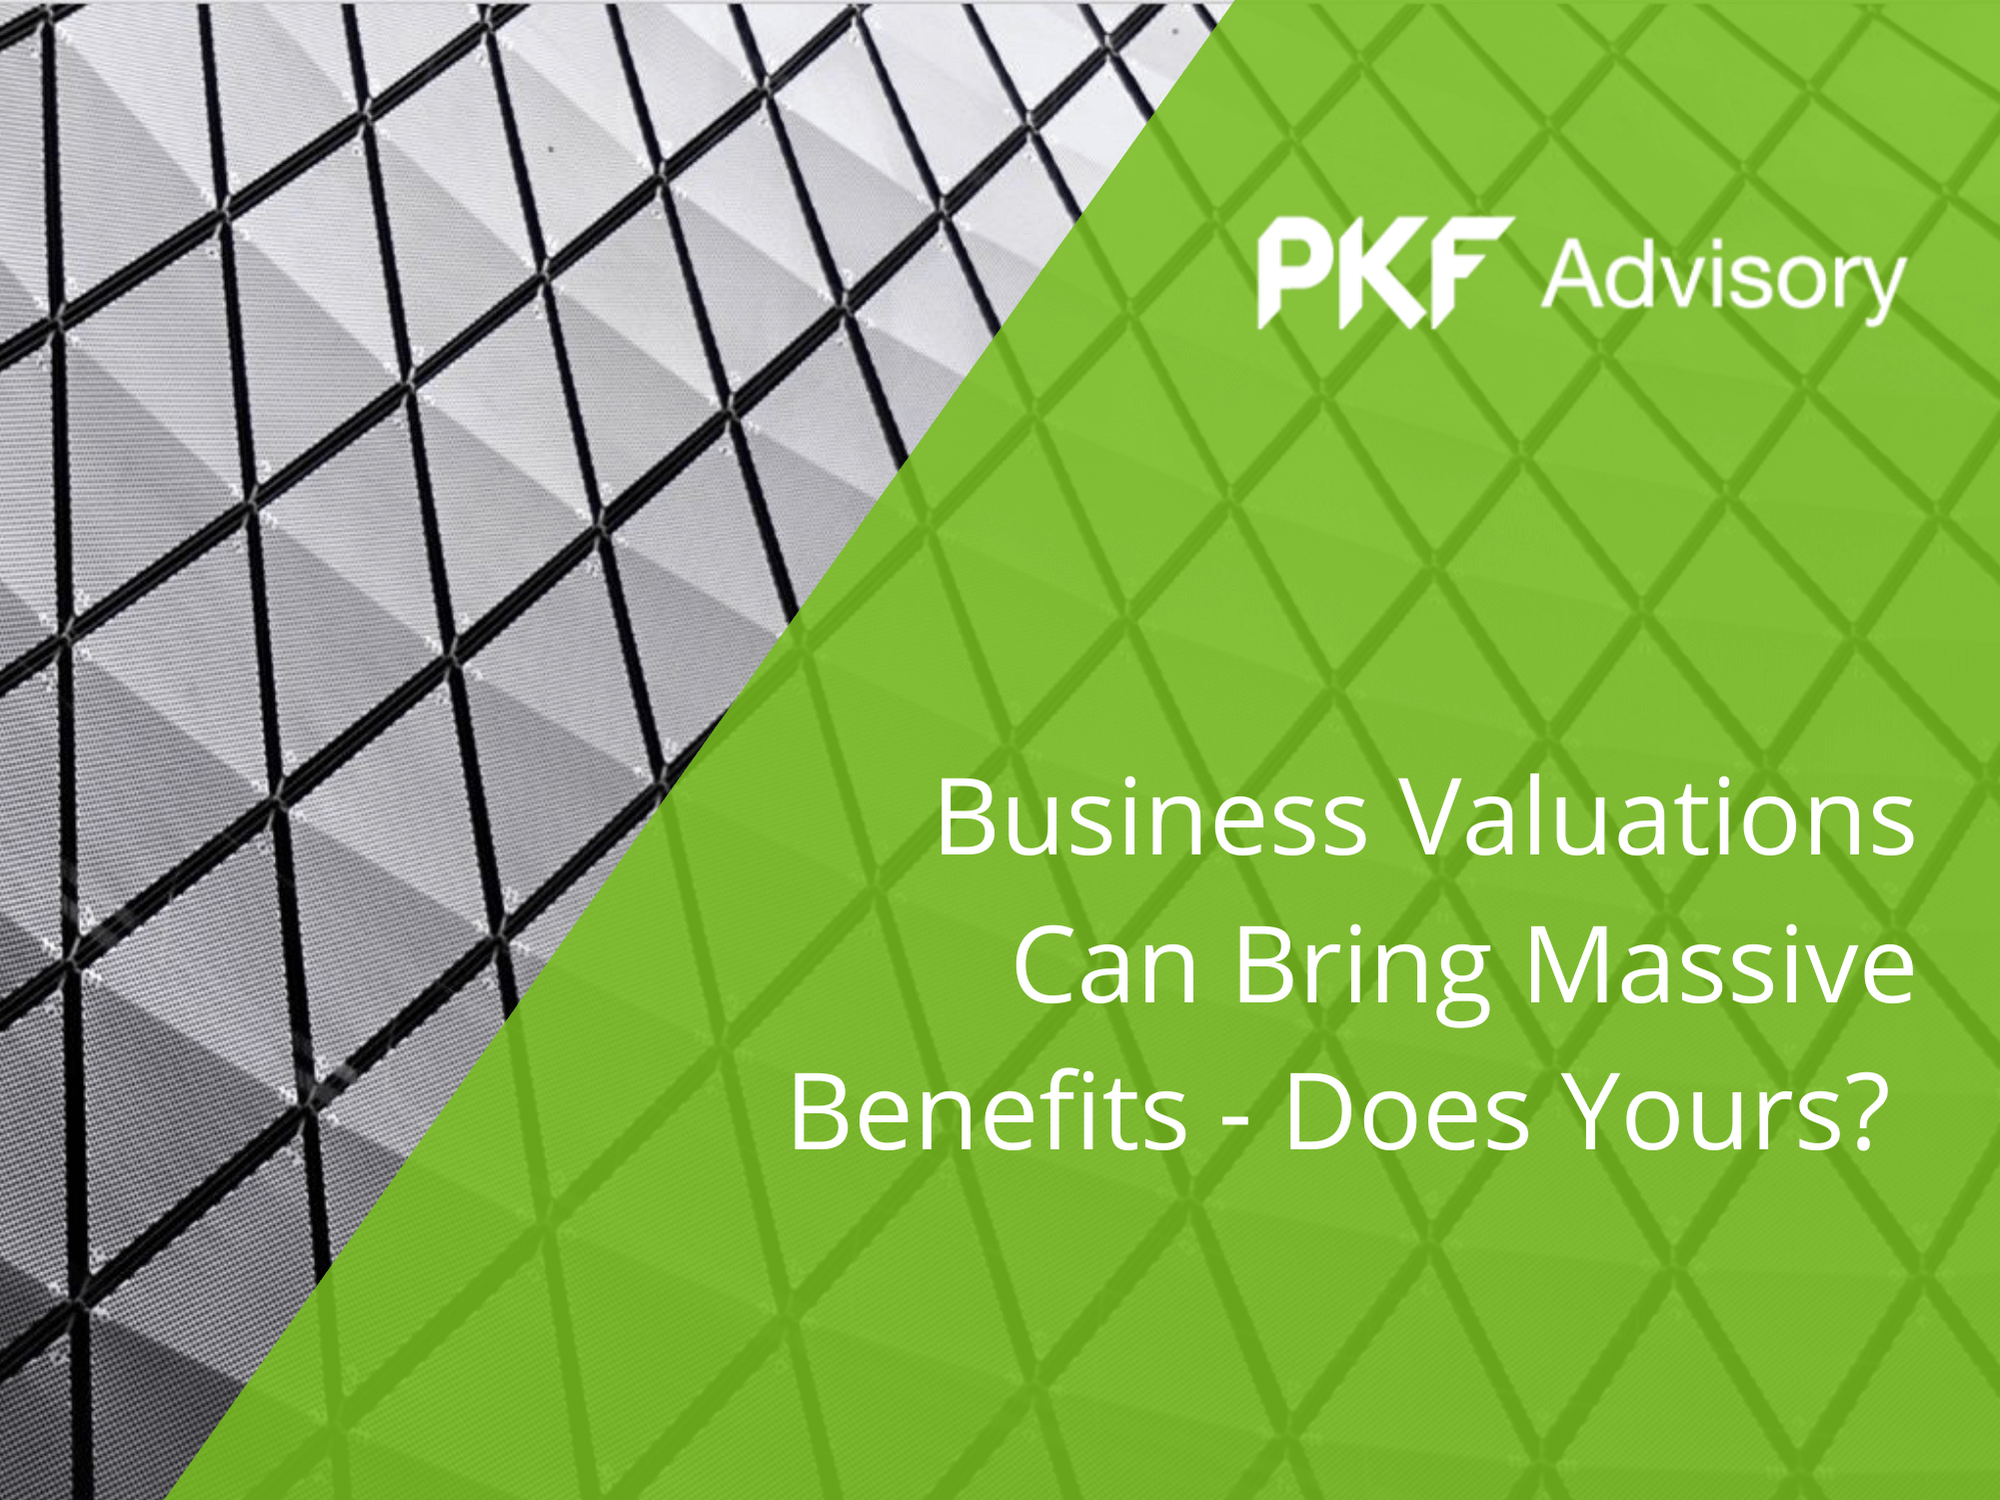 Business Valuations Can Bring Massive Benefits - Does Yours?